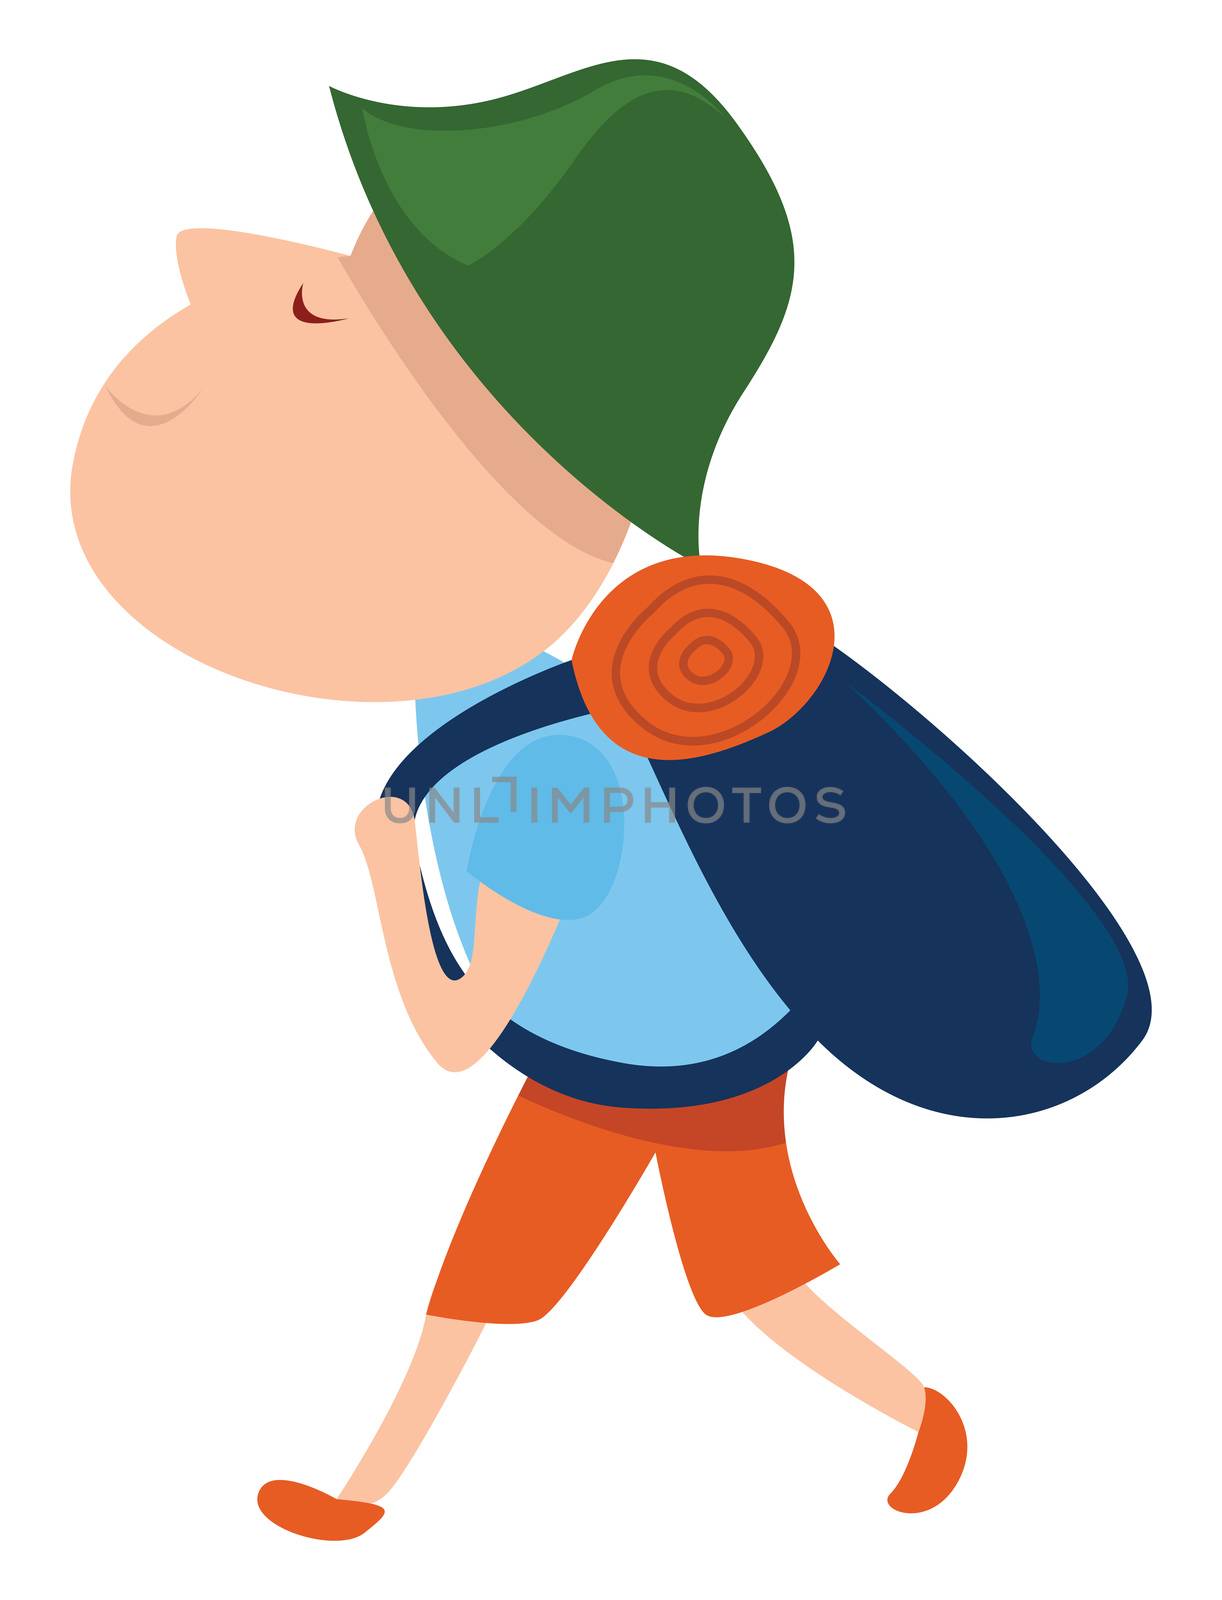 Tourist with green hat , illustration, vector on white background